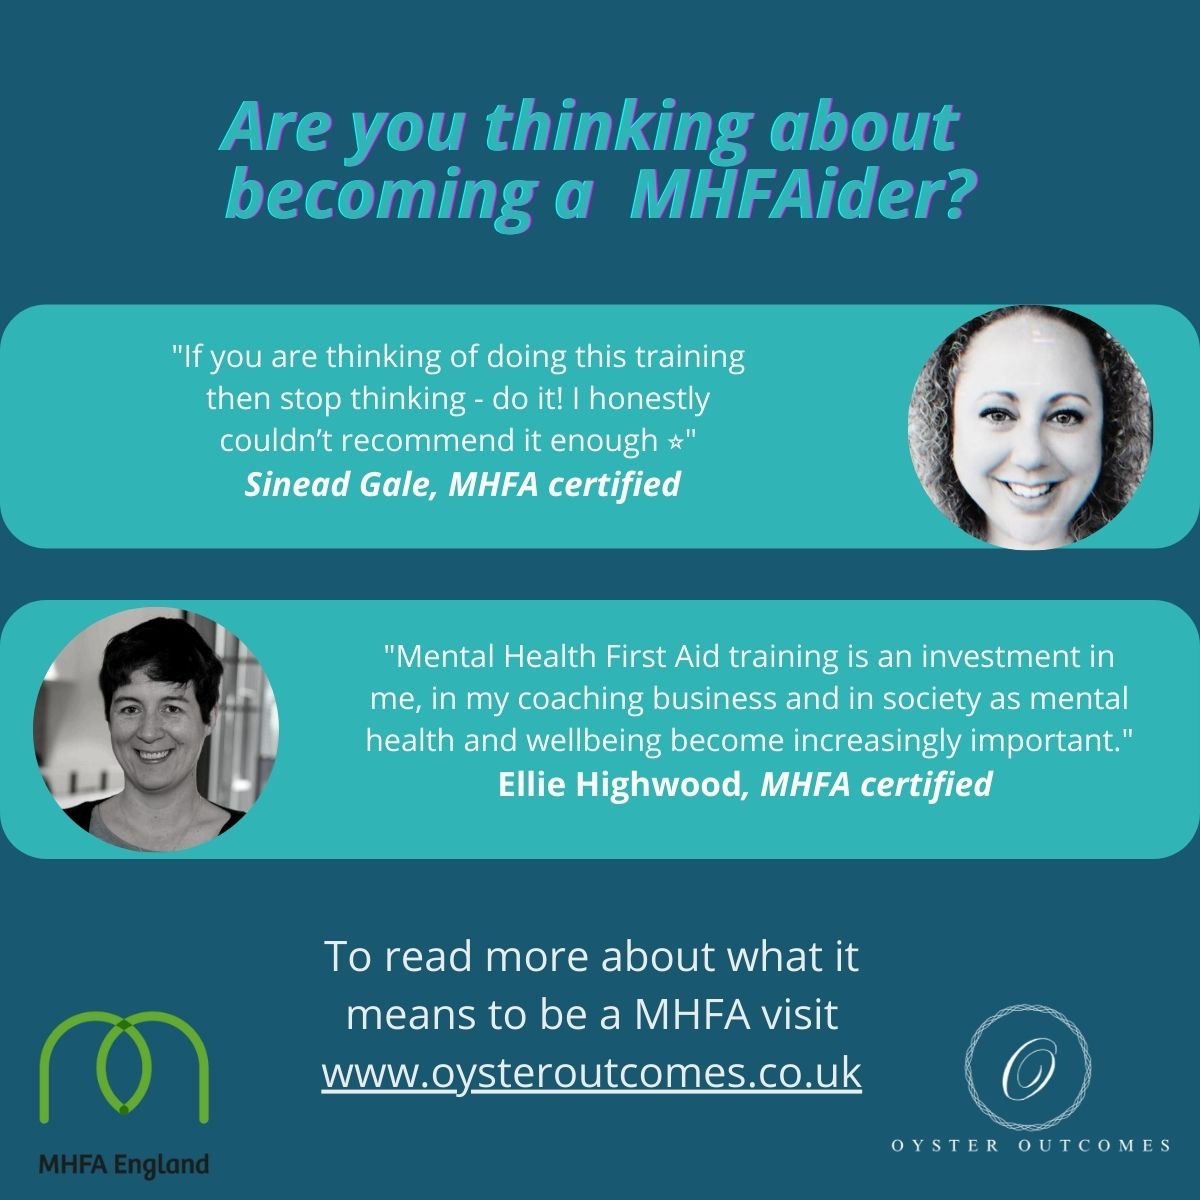 What it means to be a MHFAider